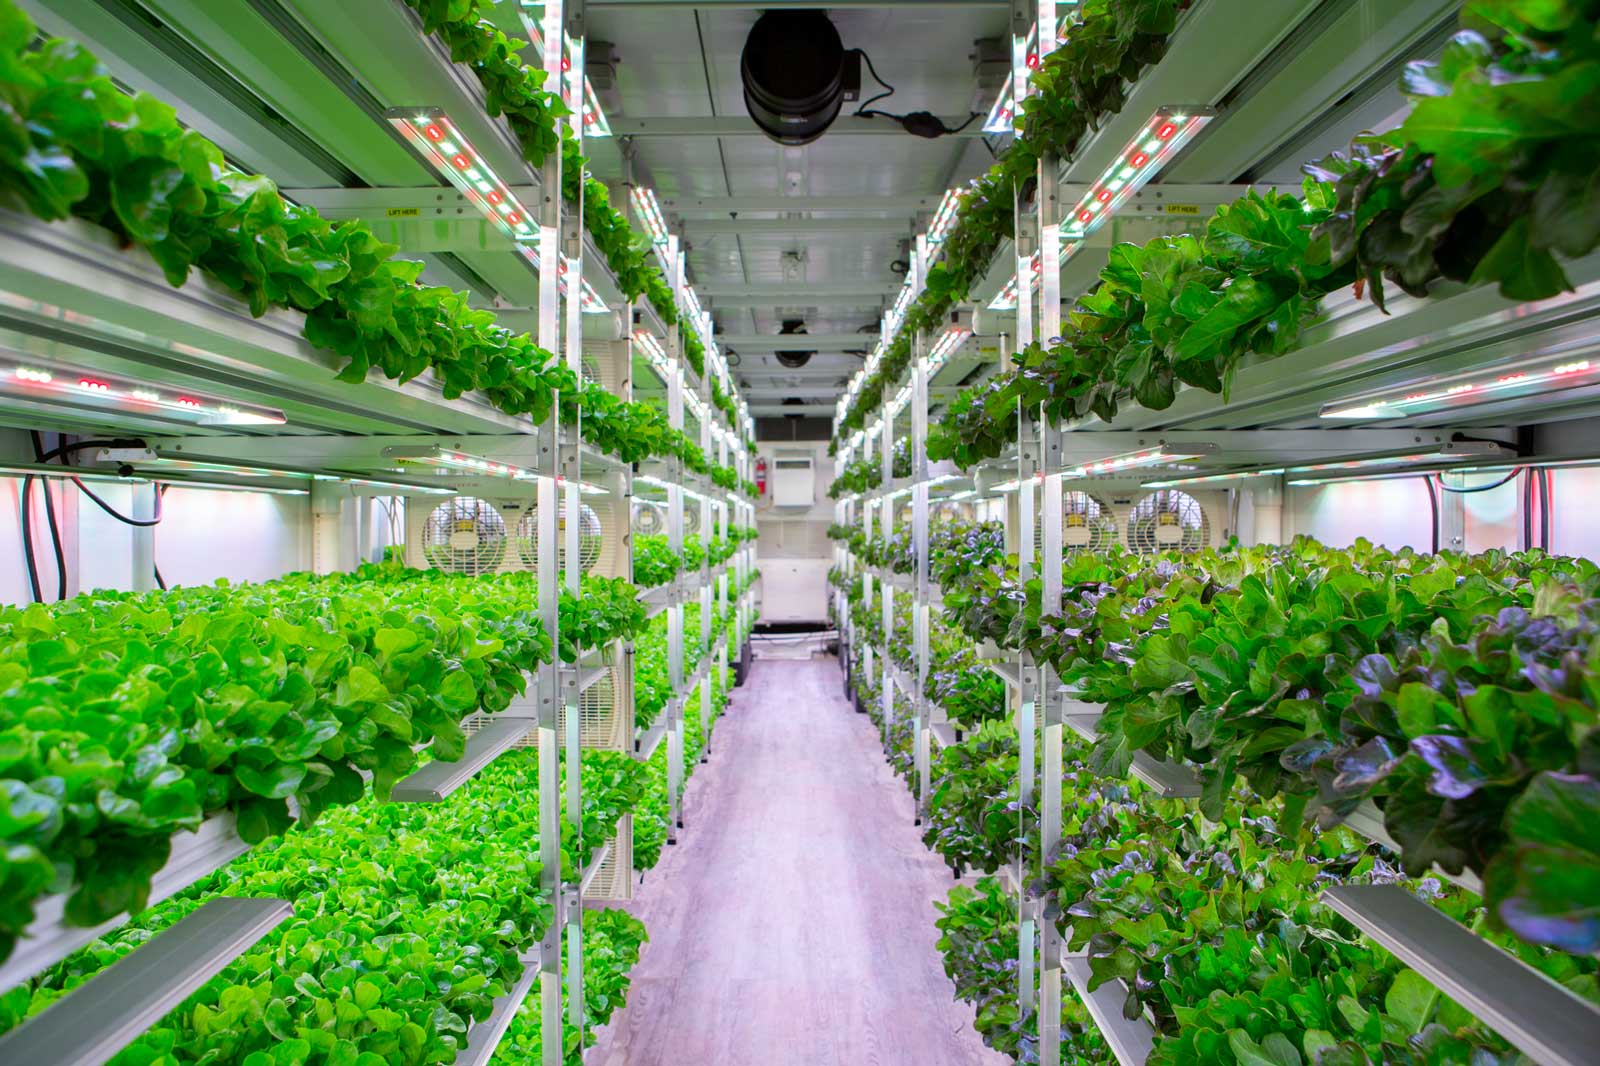 http://Inside%20container%20farm%20image%20of%20green%20oak%20lettuce%20on%20the%20left%20and%20red%20oak%20lettuce%20on%20the%20right